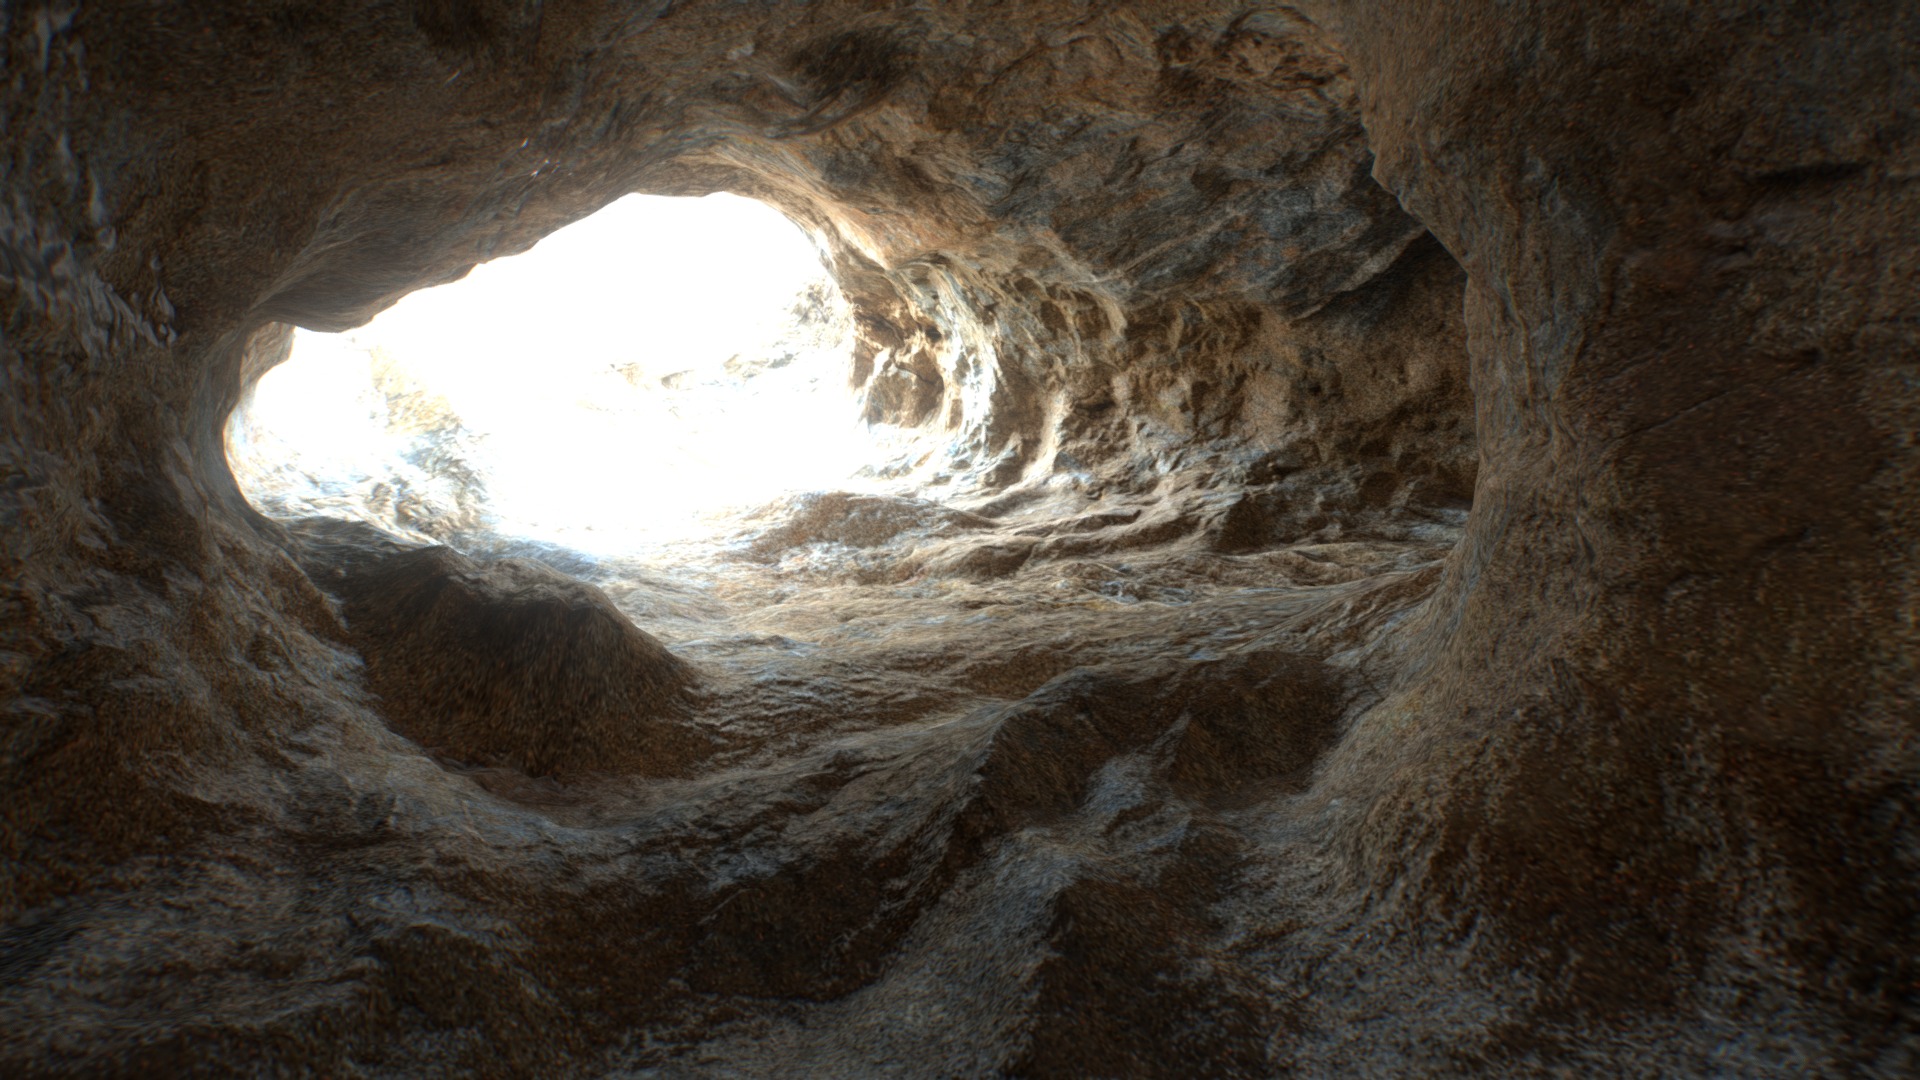 3D model Realistic cave –  model nº1 - This is a 3D model of the Realistic cave -  model nº1. The 3D model is about a cave with a hole in it.